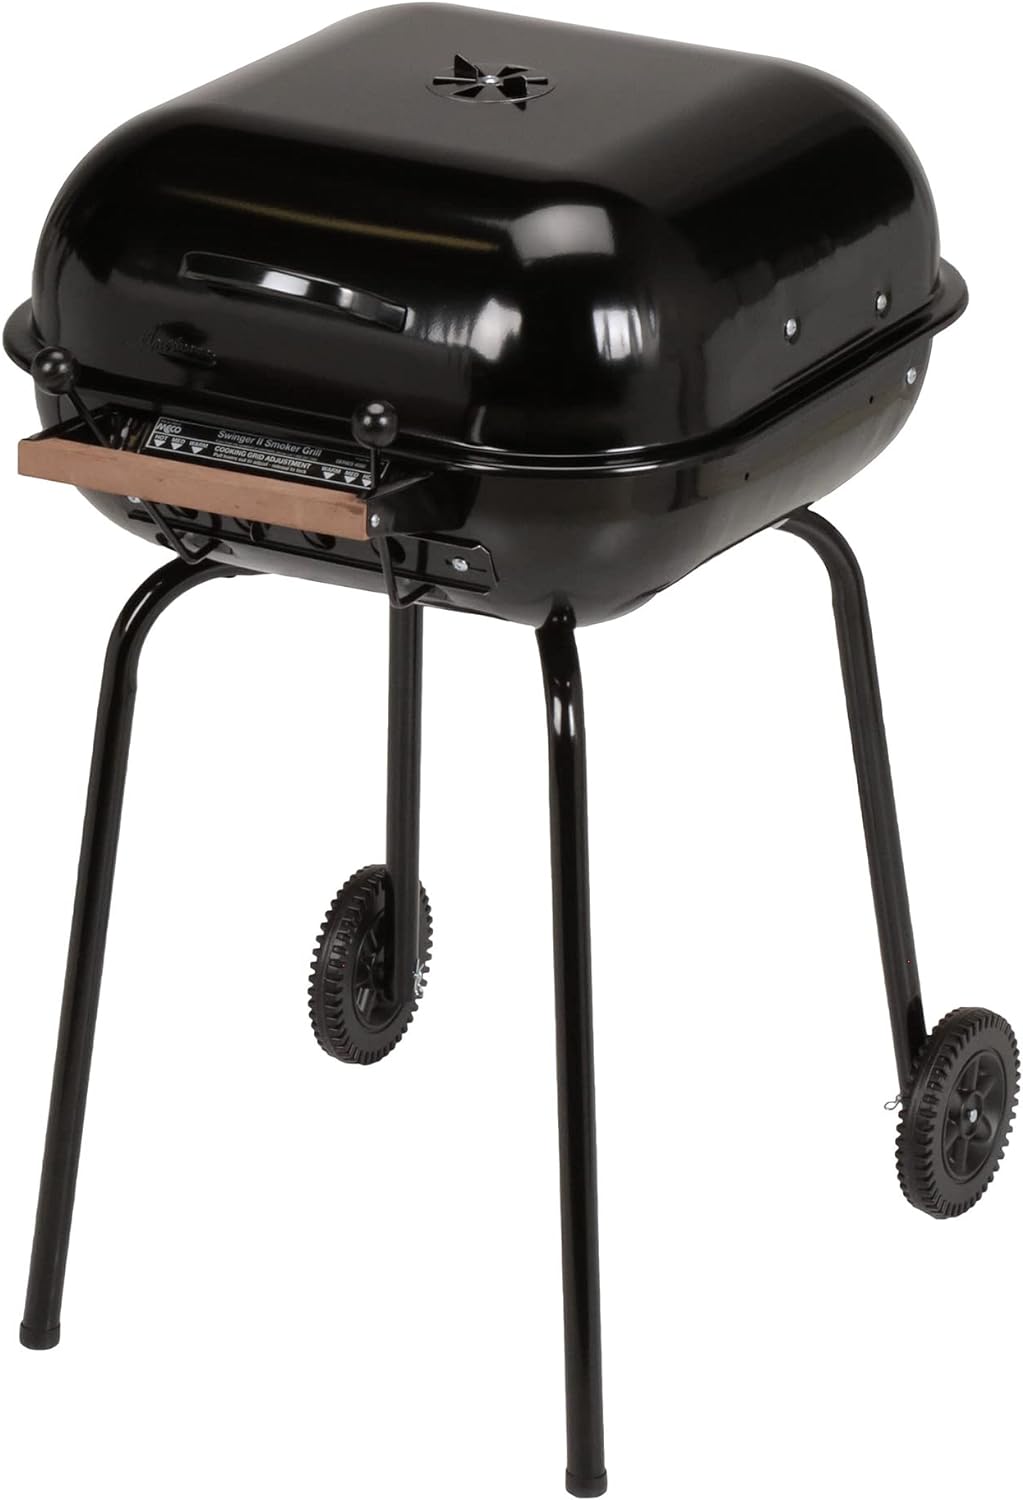 MECO Americana Swinger Grill Review